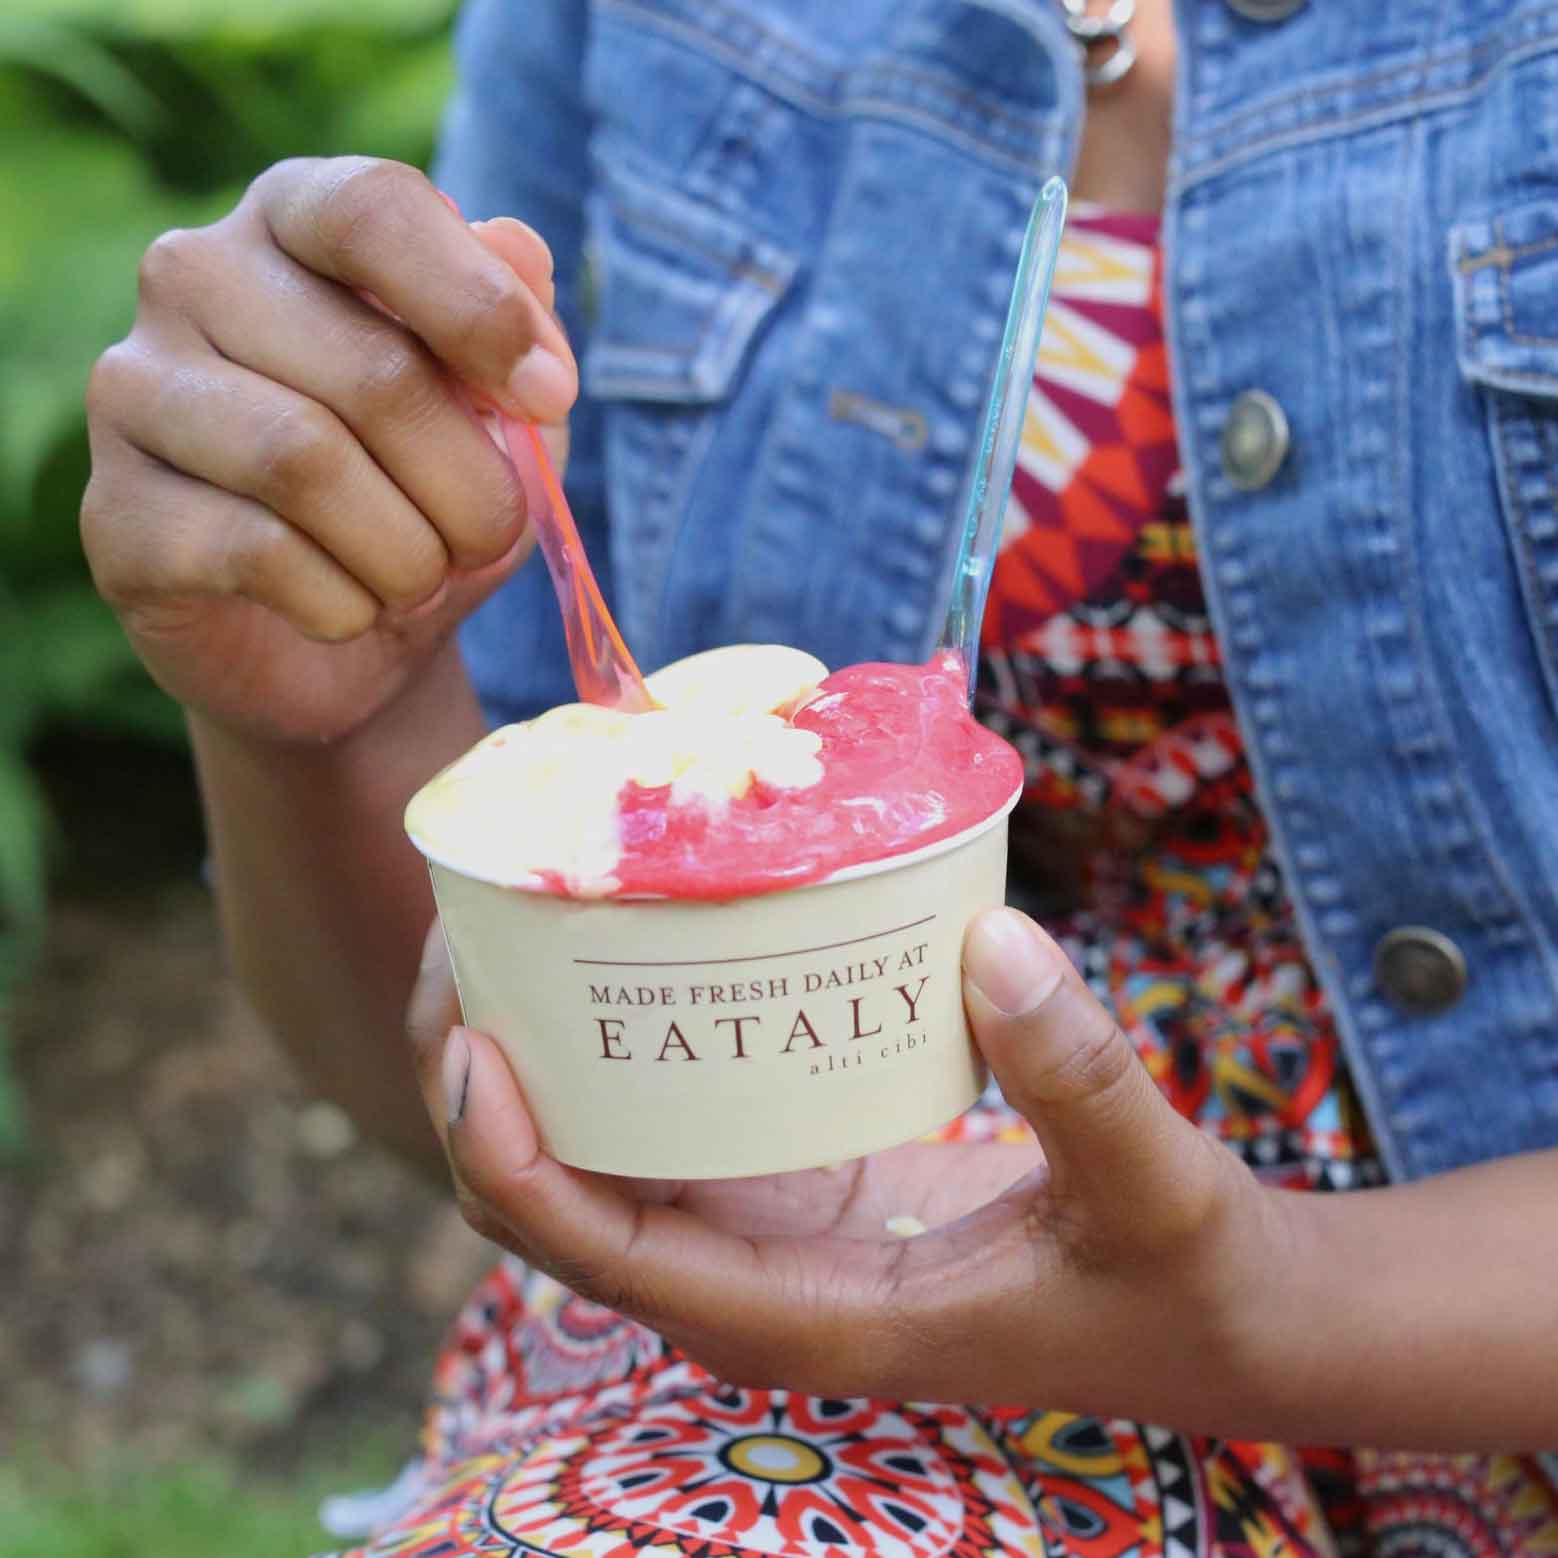 A woman in a patterned dress and jean jacket eats a cup of gelato from Il Gelato.